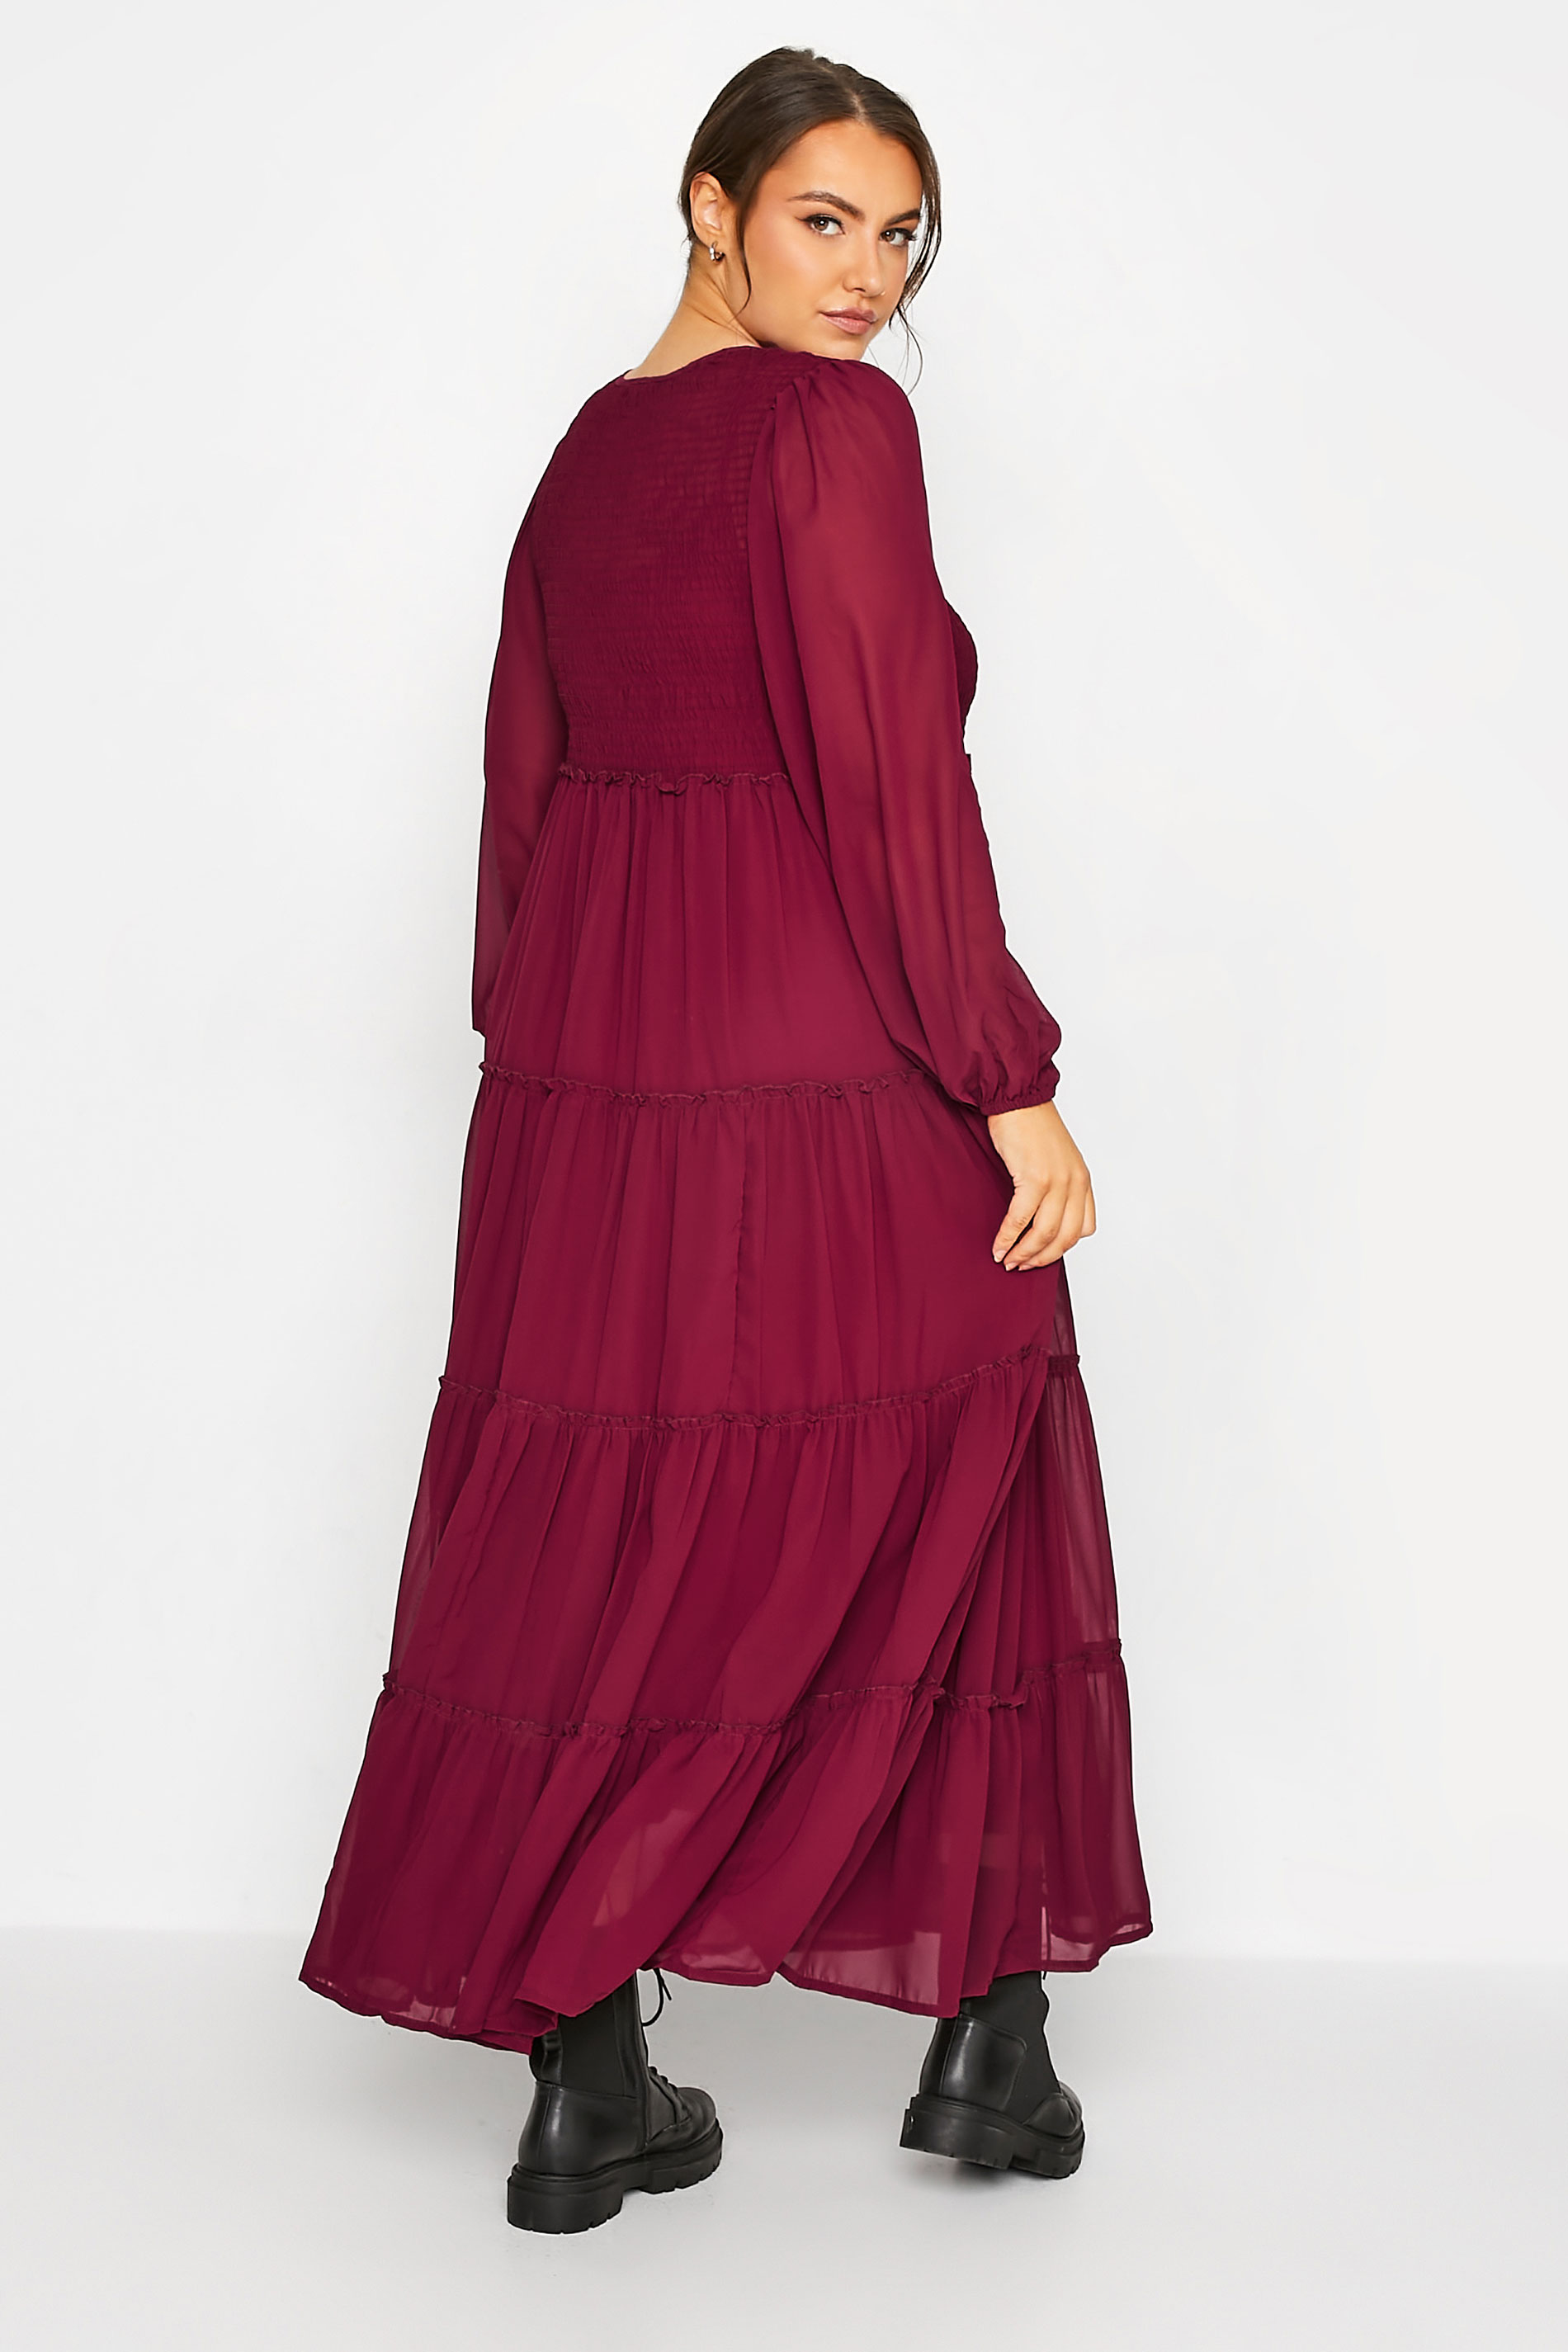 LIMITED COLLECTION Curve Burgundy Red Tierred Chiffon Dress 3